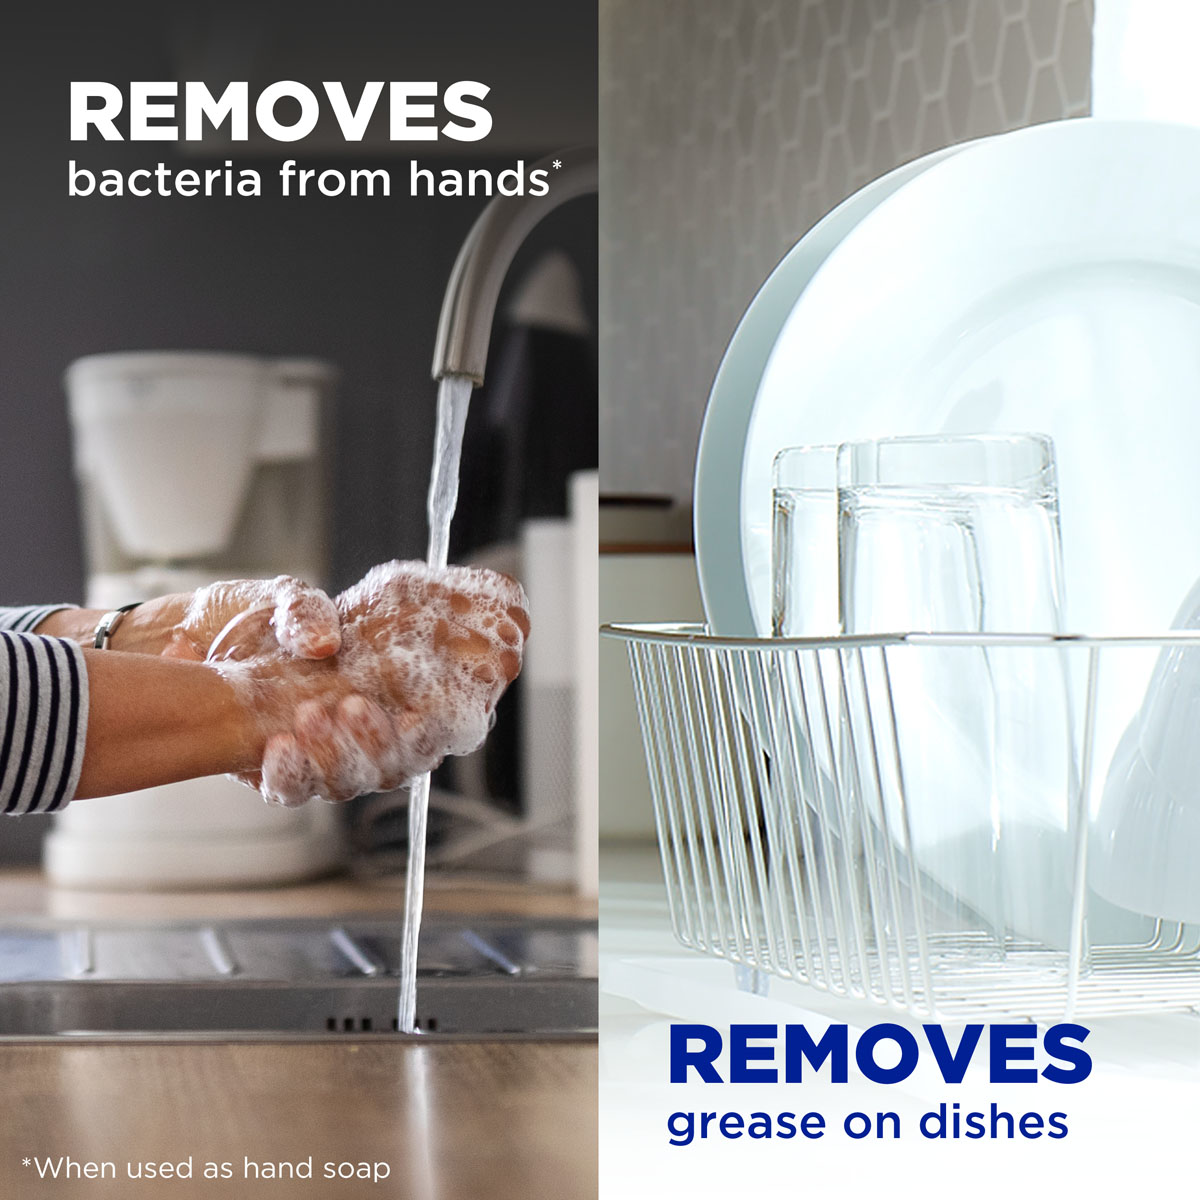 Dawn Ultra EZ-Squeeze removes bacteria from hands, removes grease on dishes